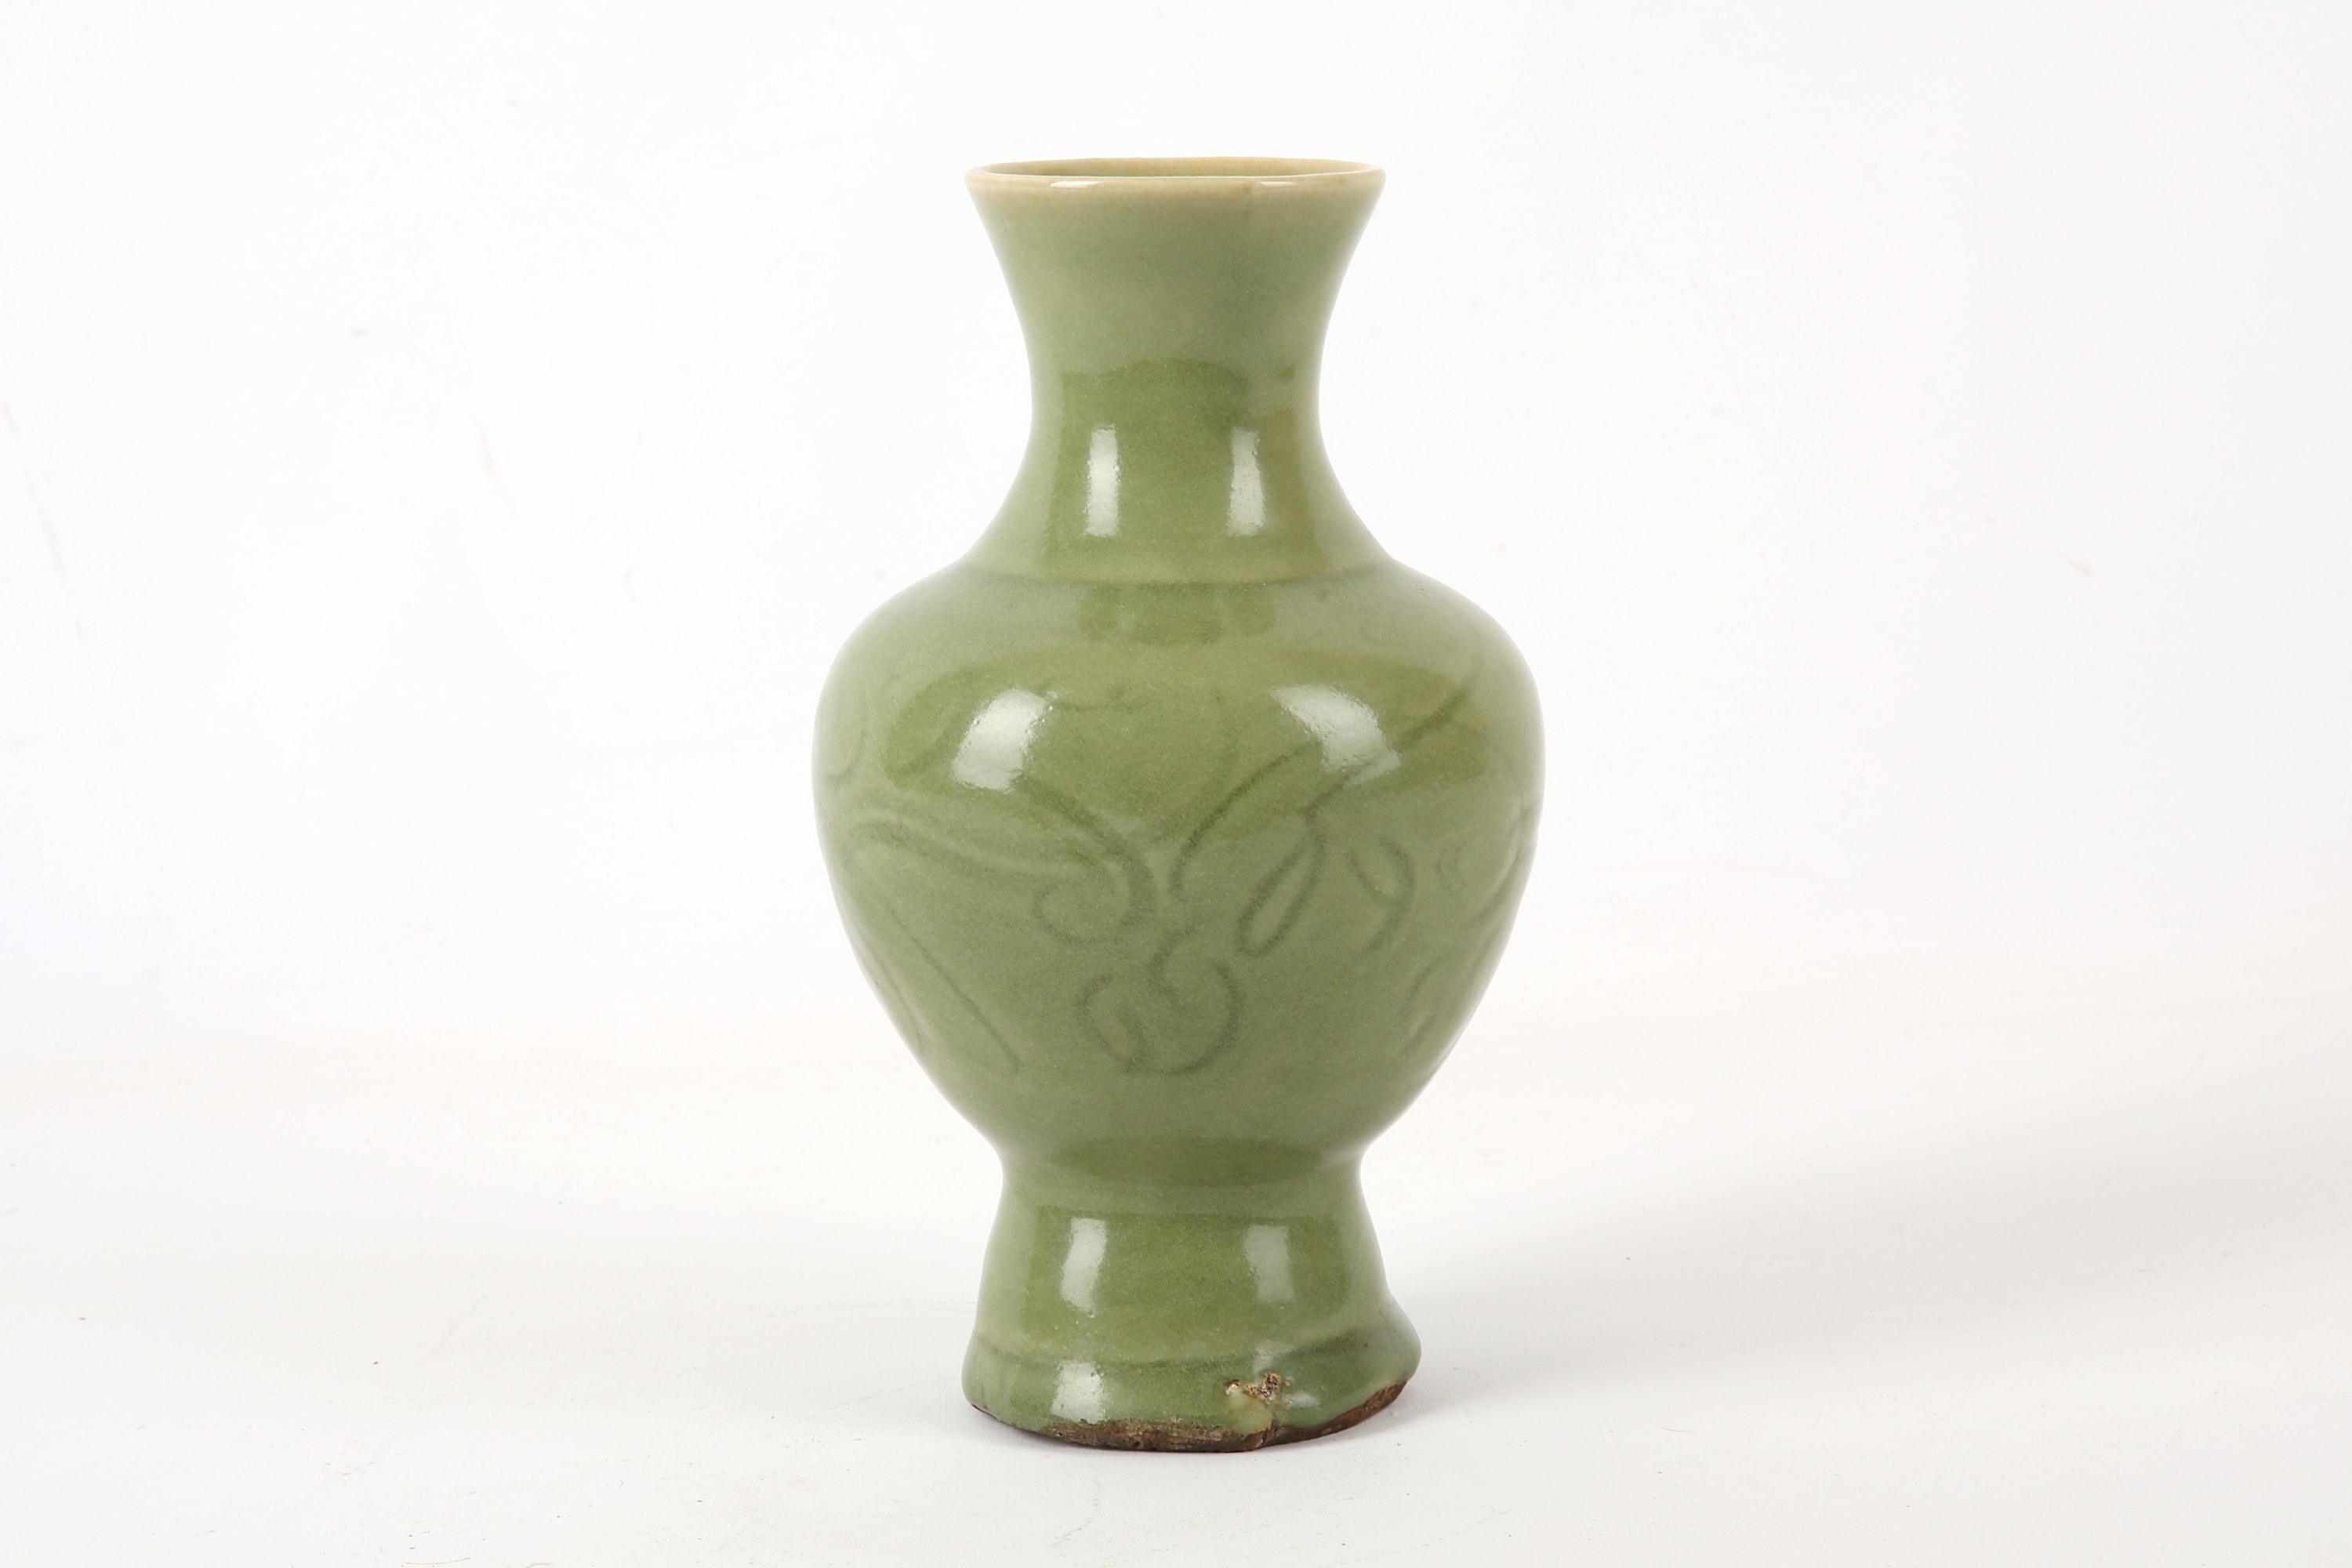 A Chinese celadon glazed vase, Ming Dynasty, of baluster form with an everted rim, decorated with